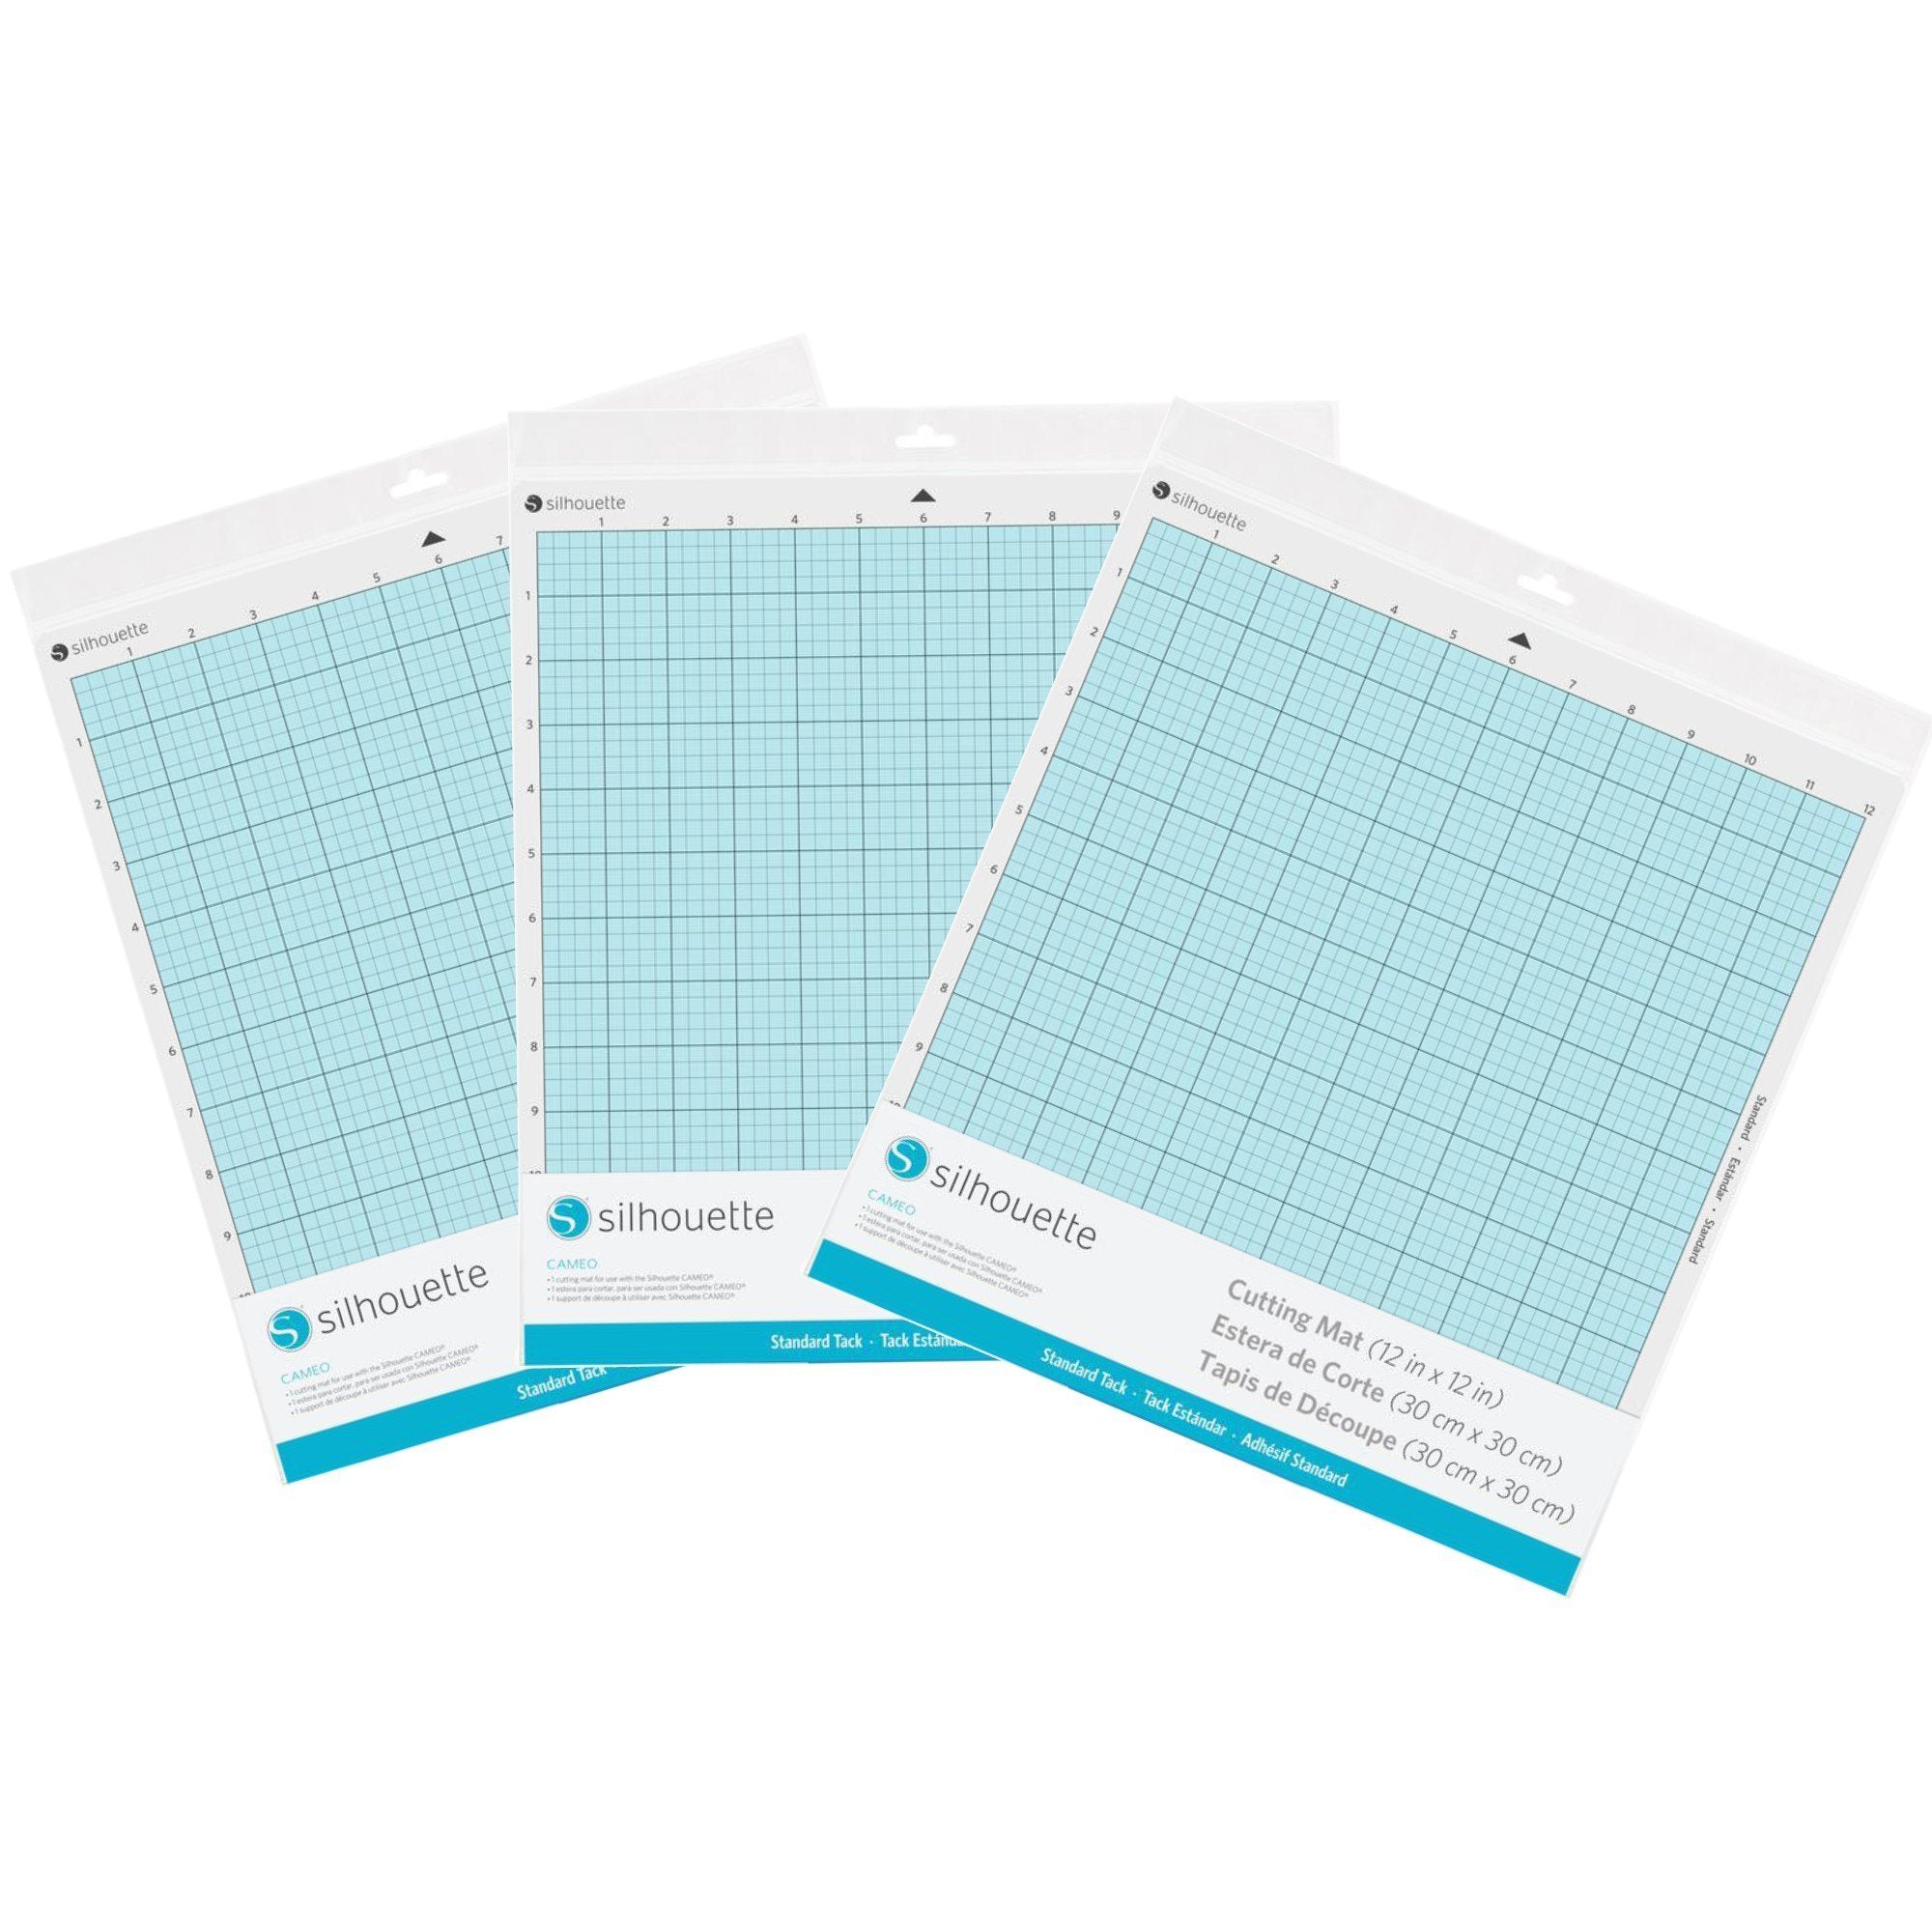 Overview of the Silhouette CAMEO Cutting Mat 